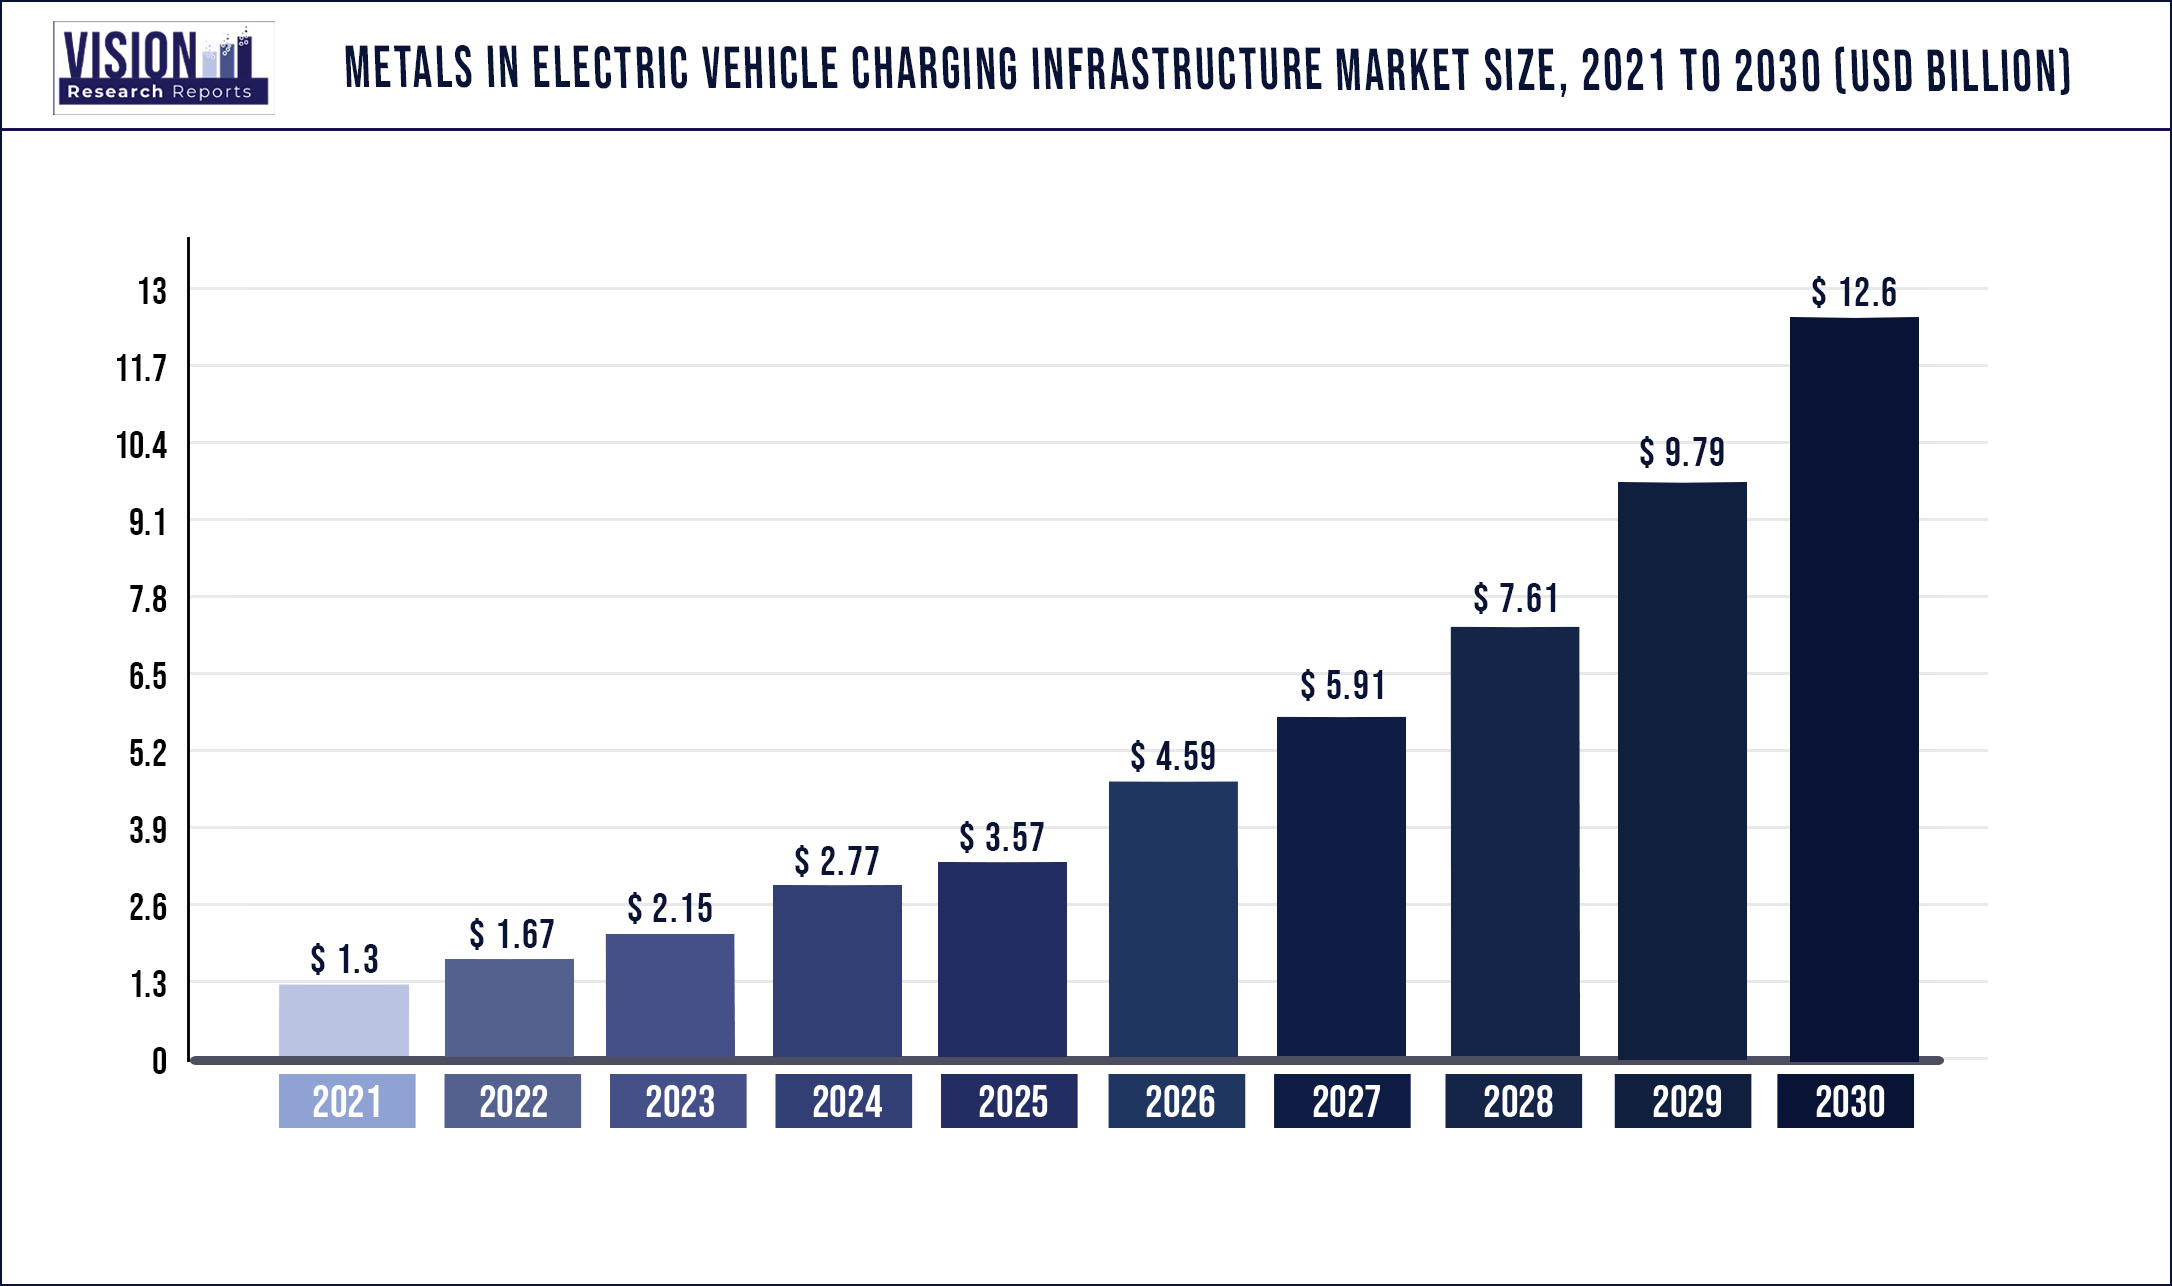 Metals In Electric Vehicle Charging Infrastructure Market Size 2021 to 2030